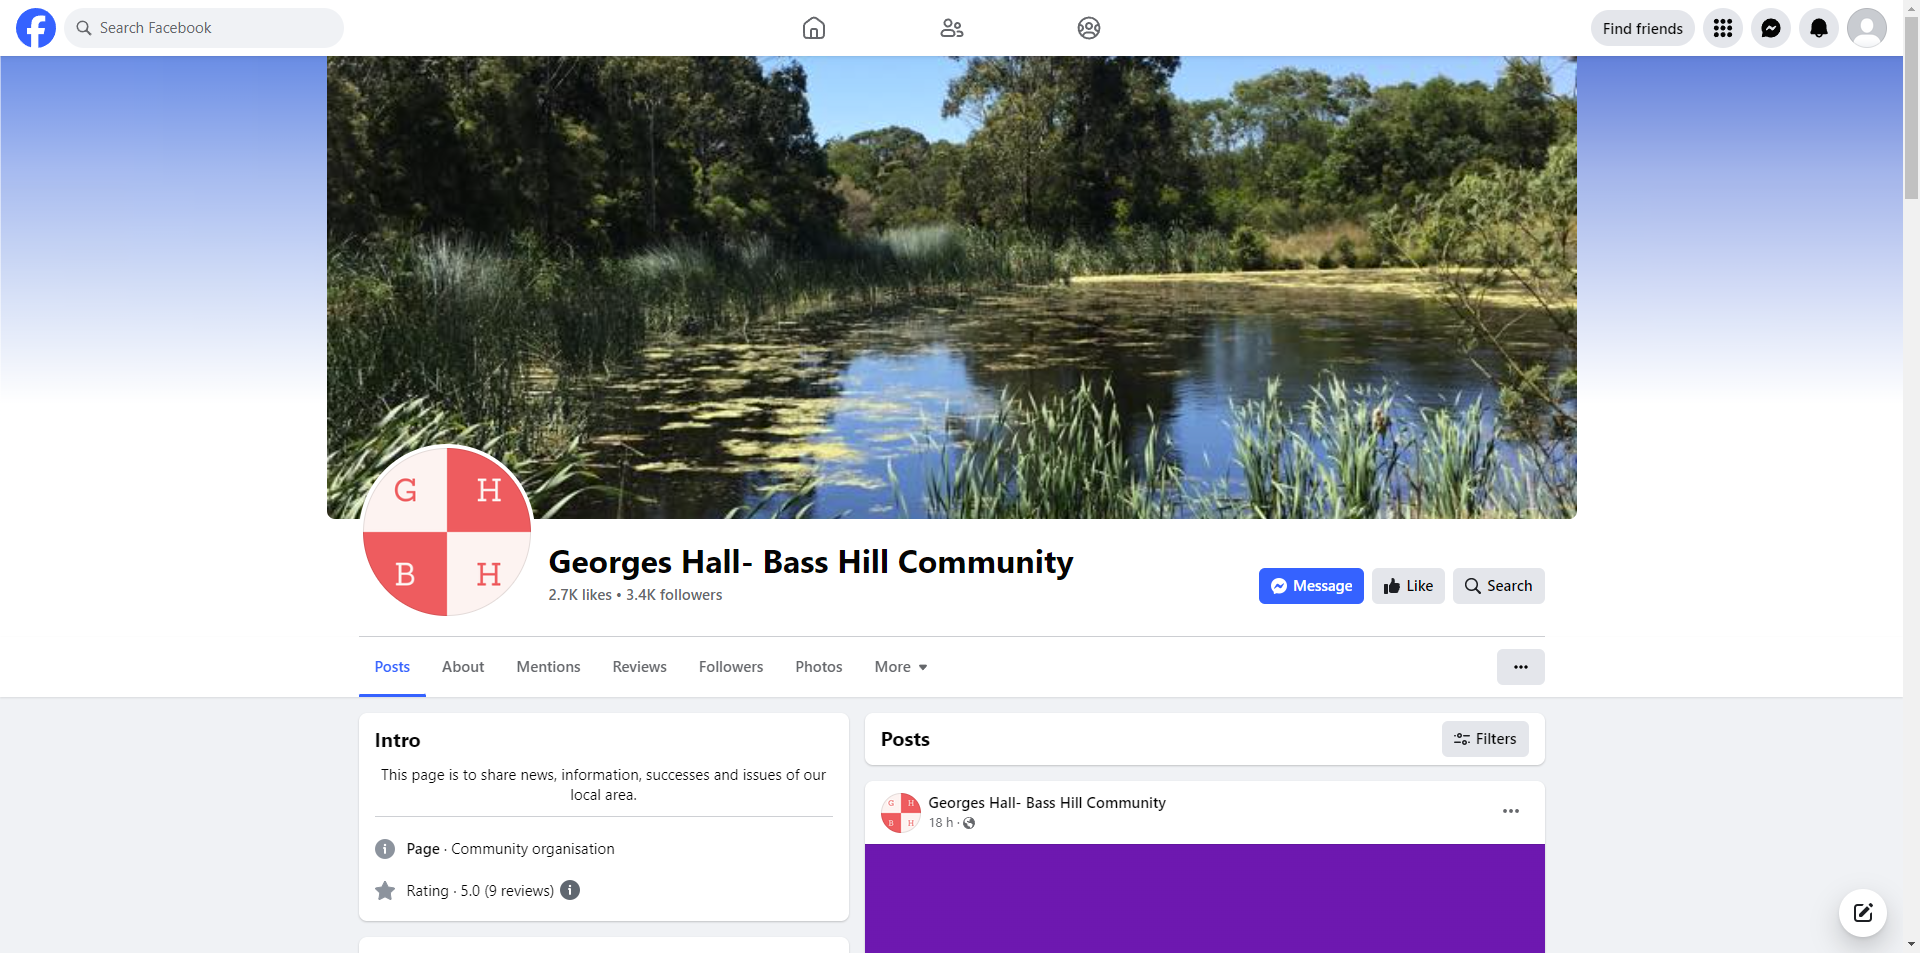 Georges Hall - Bass Hill Community